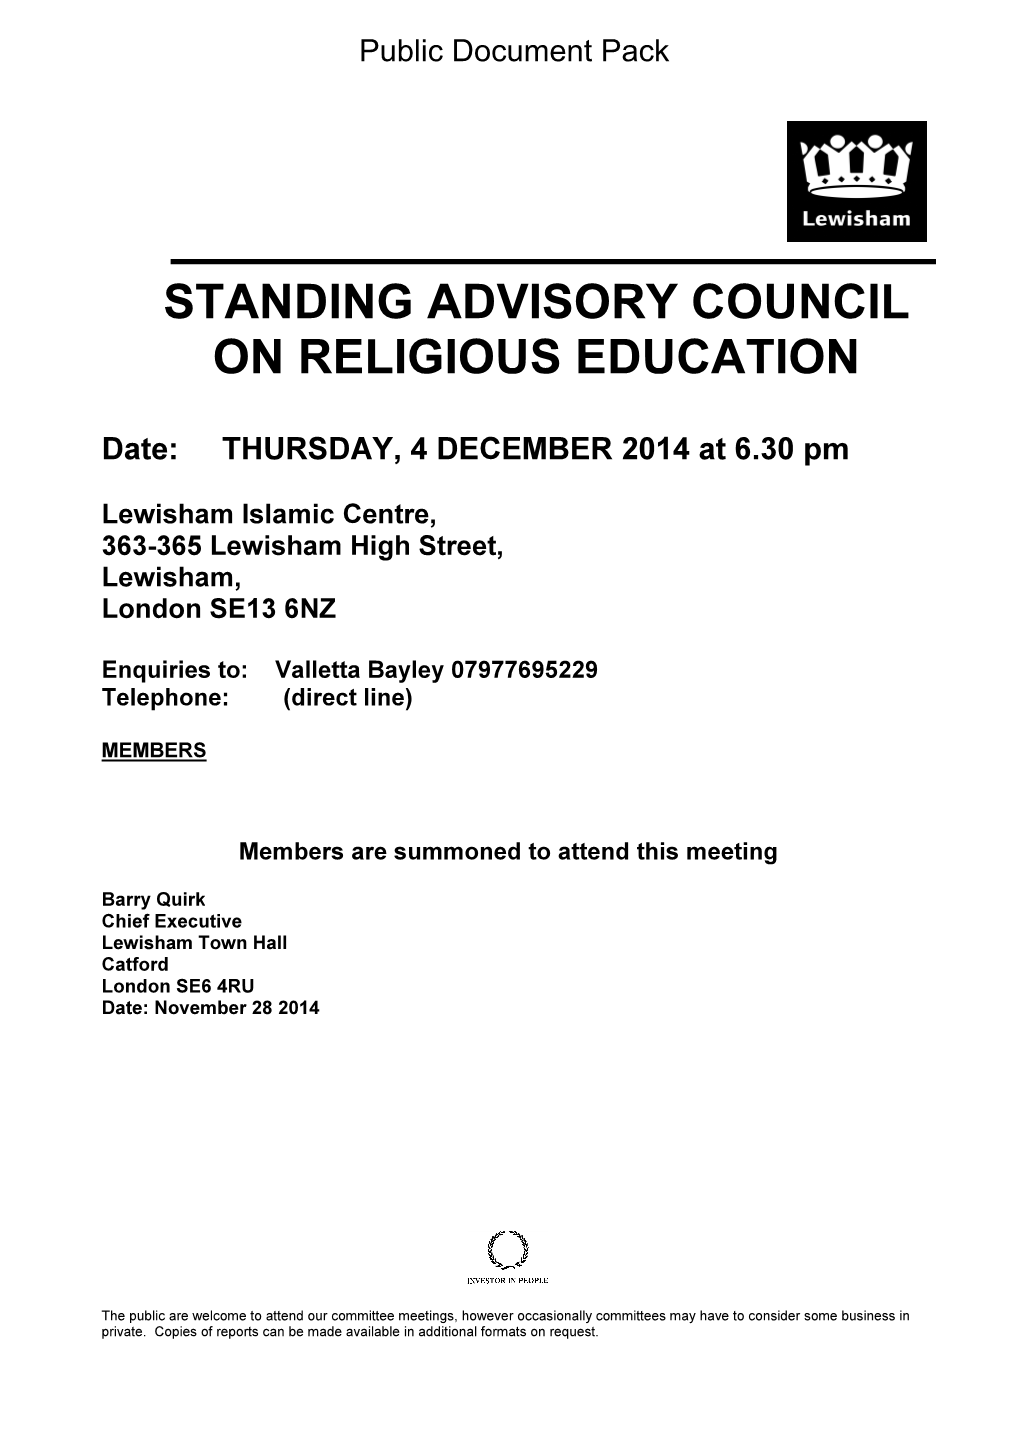 Standing Advisory Council on Religious Education